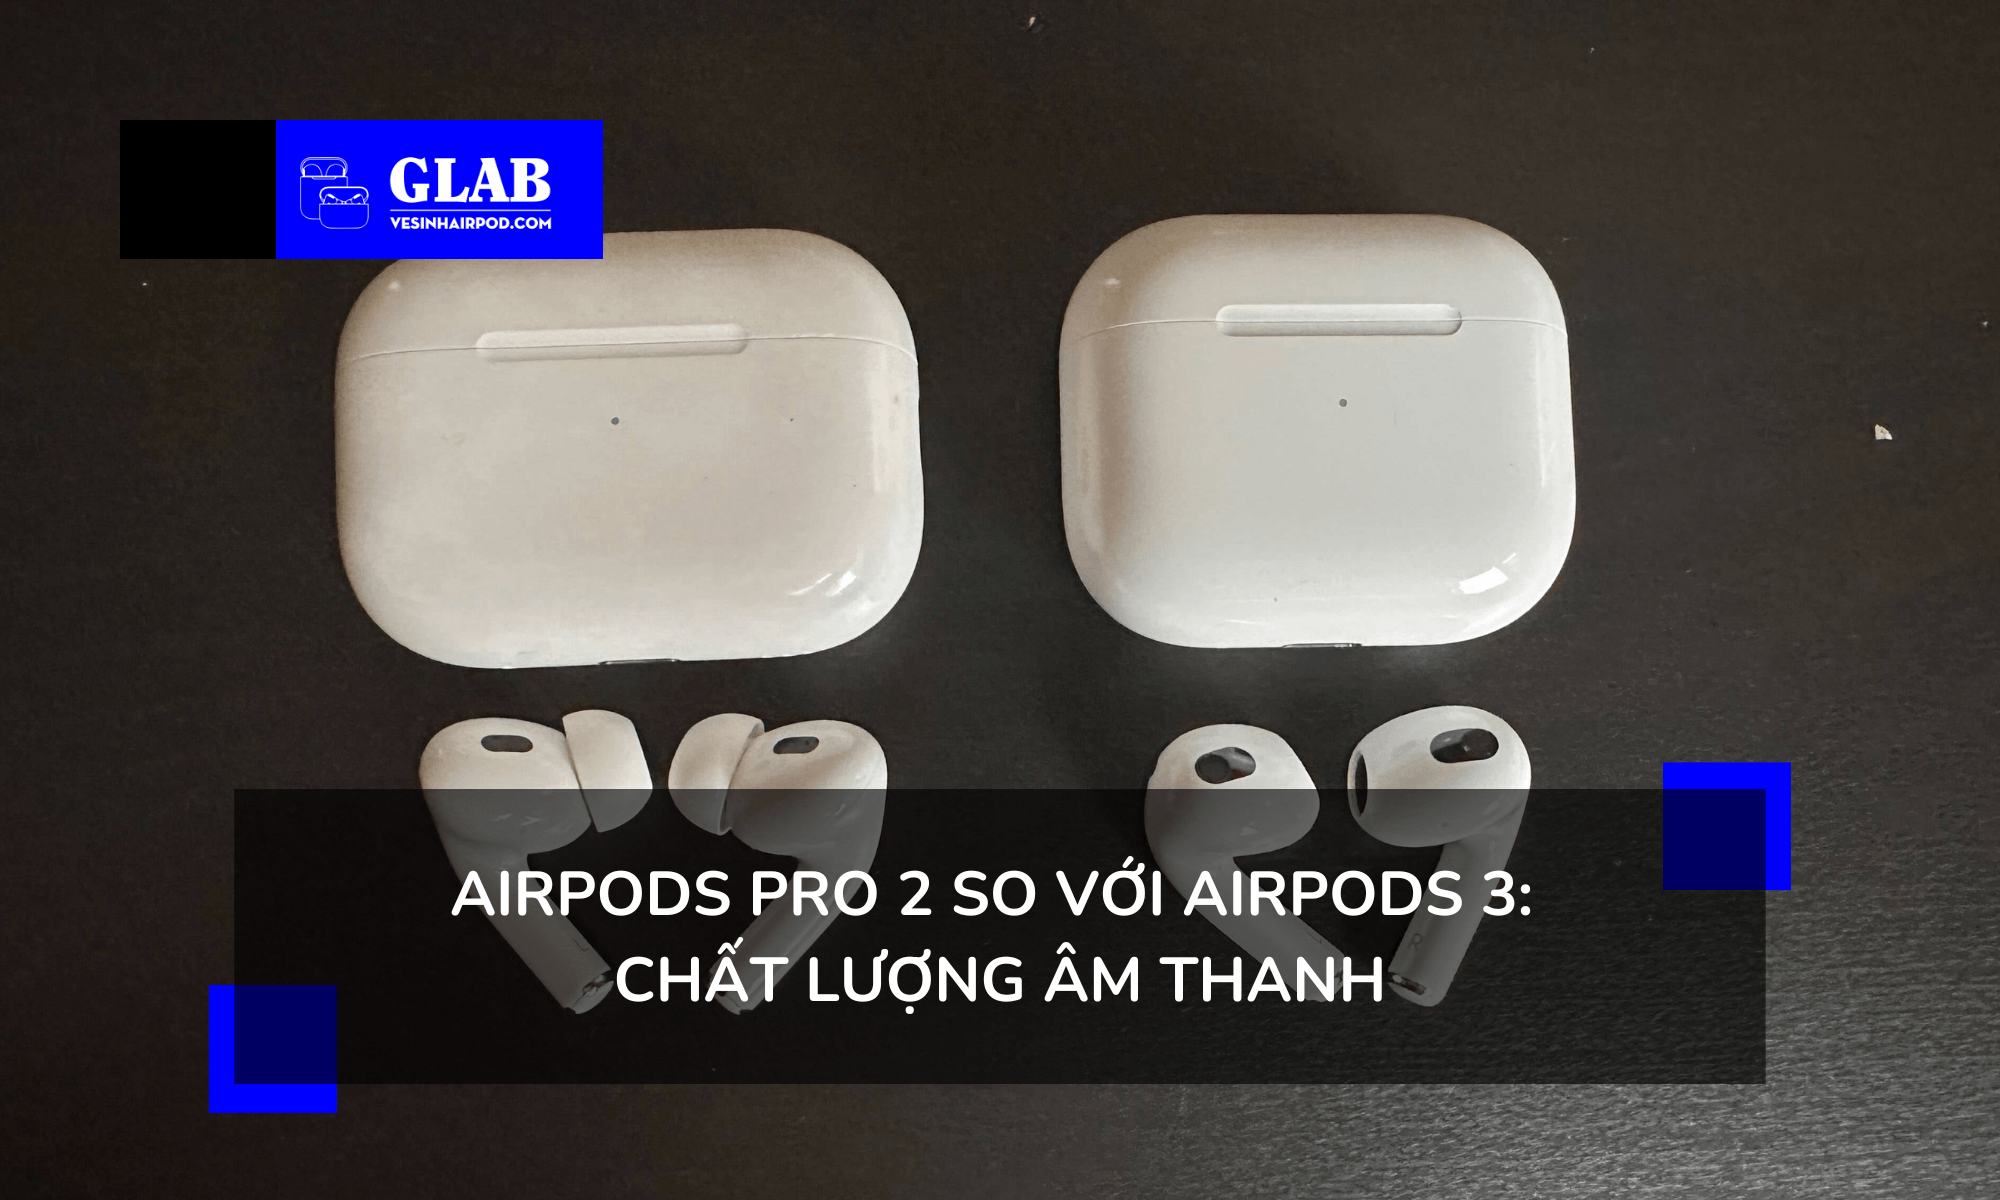 airpods-pro-2-so-voi-airpods-3